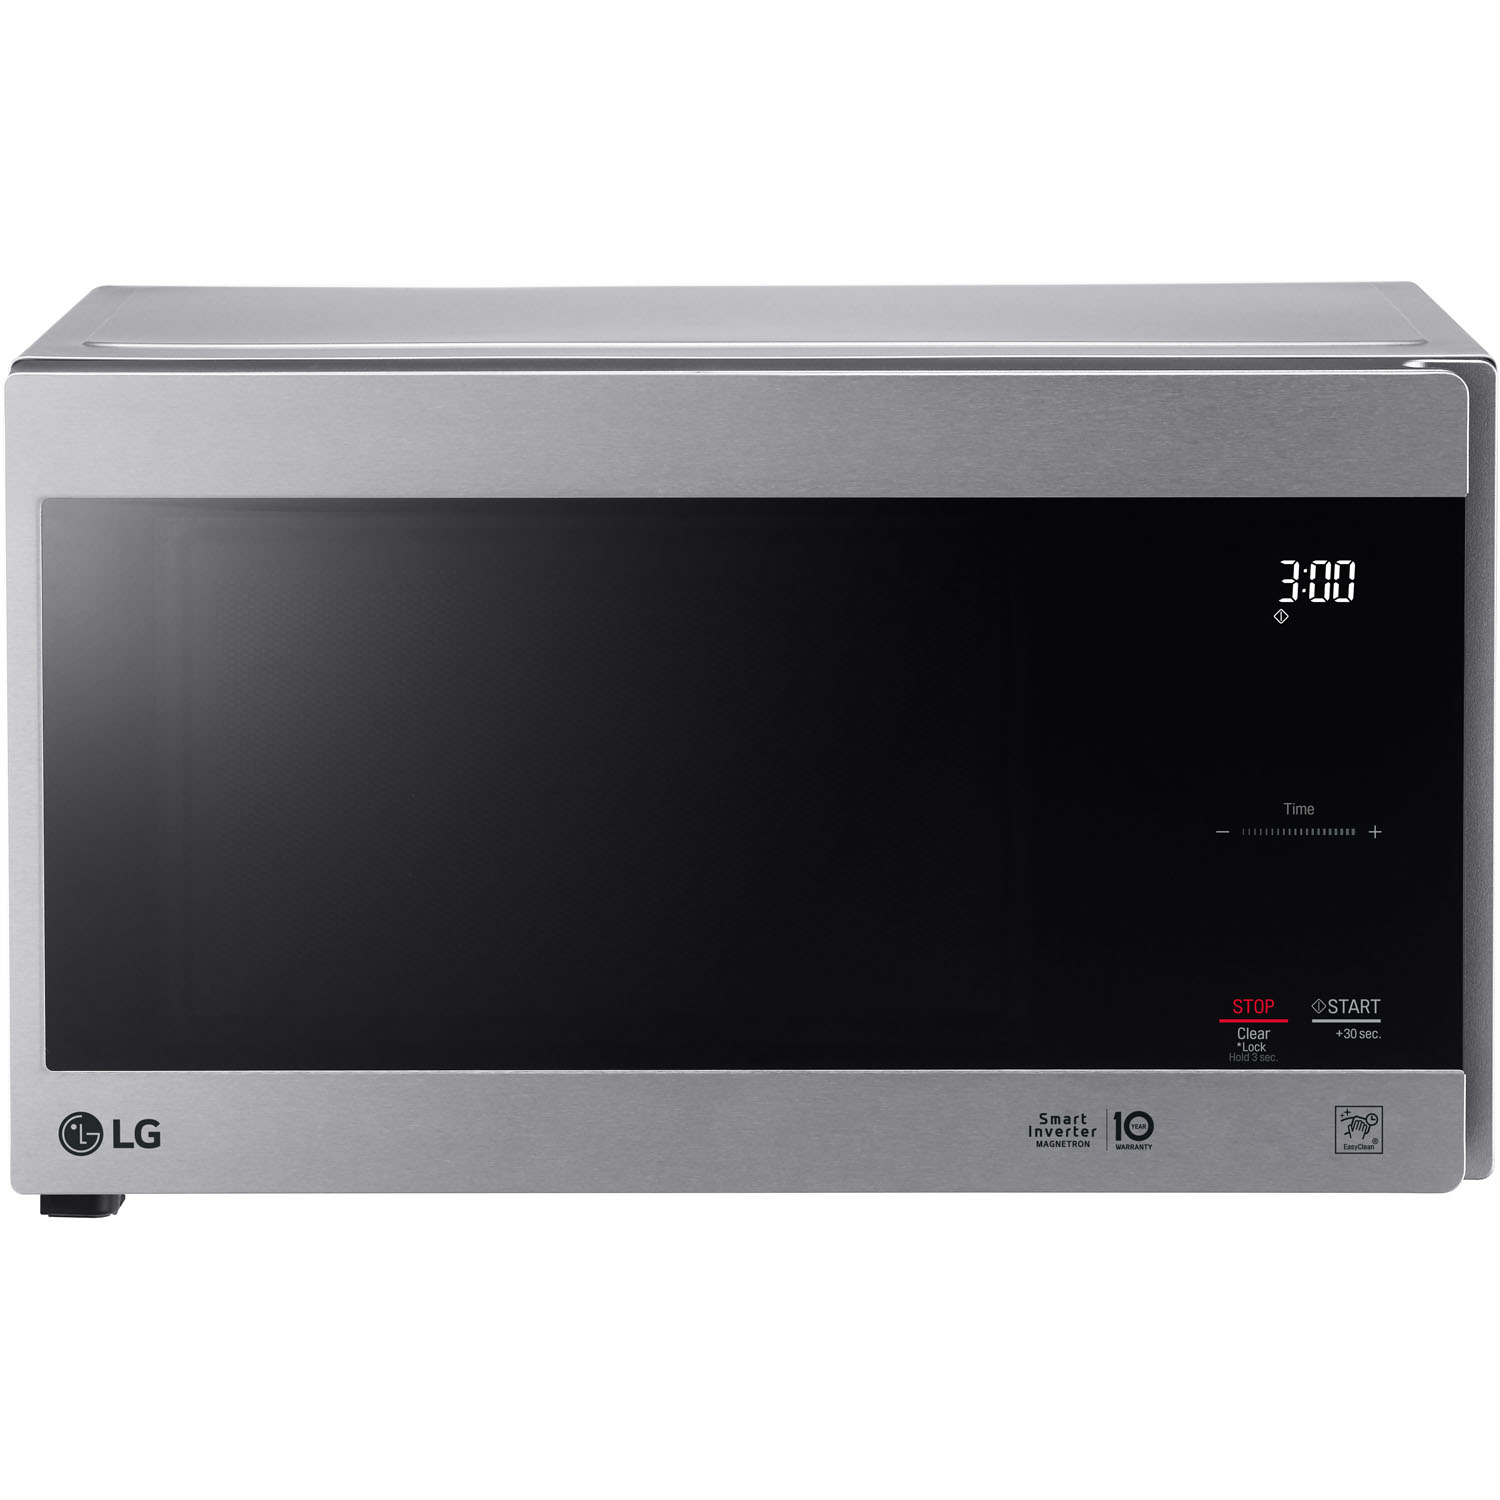 LG Neo Chef 0.9 Cu. Ft. 1000W Countertop Microwave - image 1 of 8